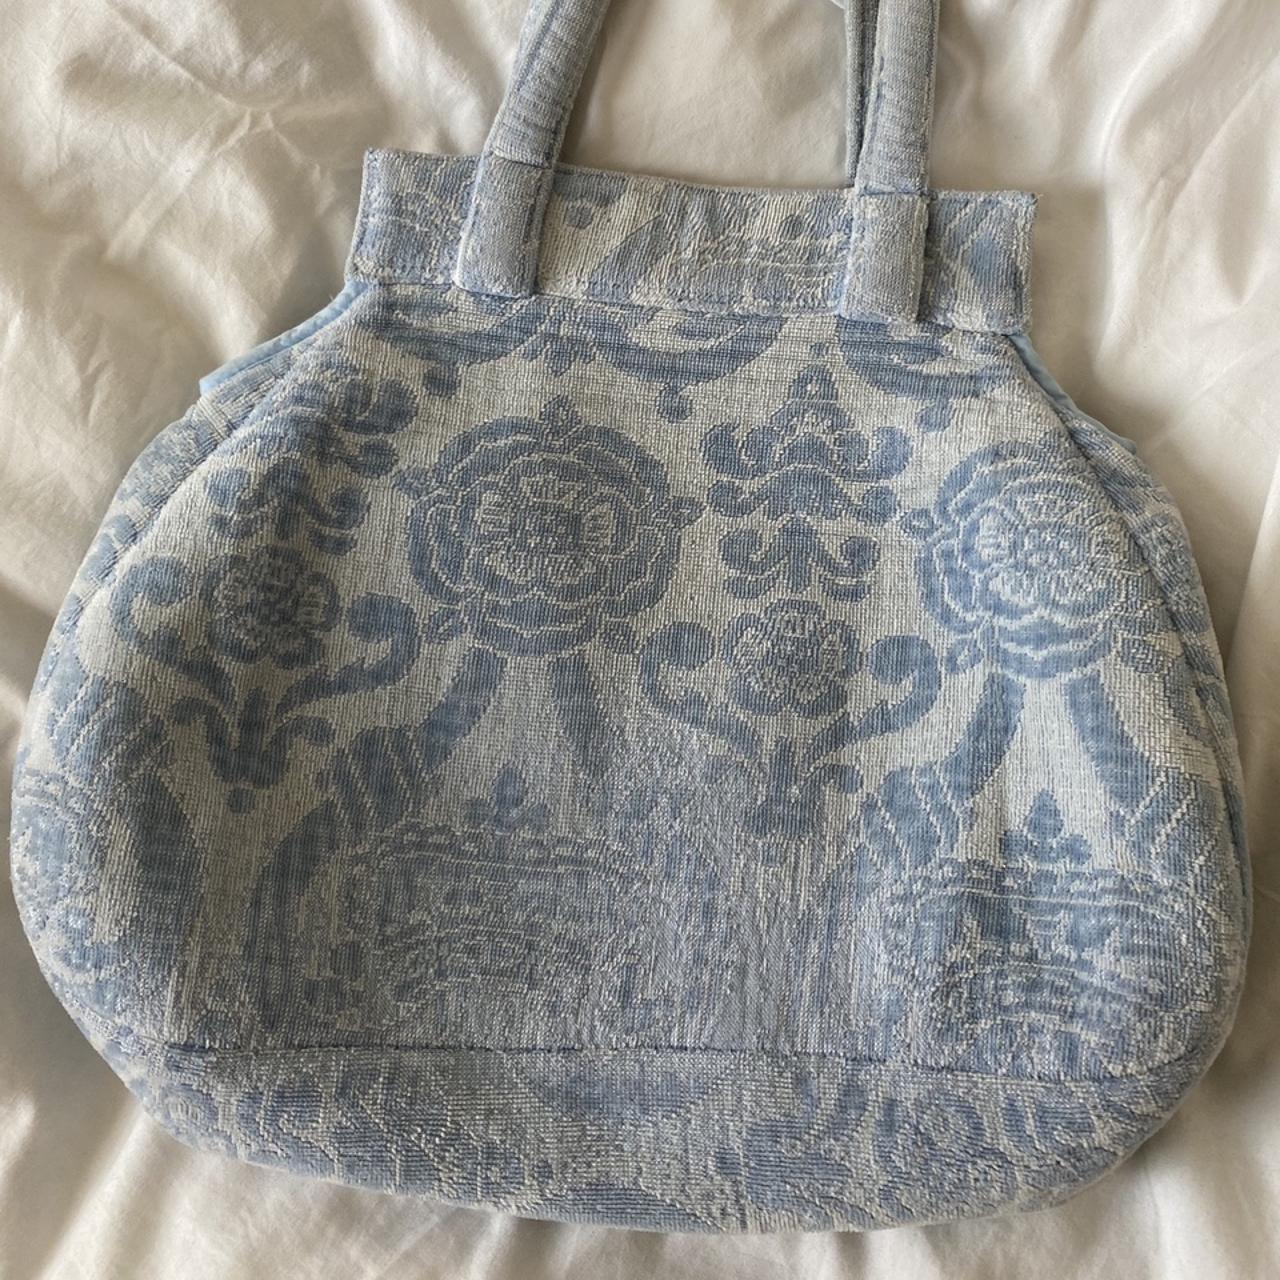 Vivienne Westwood Women's Blue and White Bag (2)